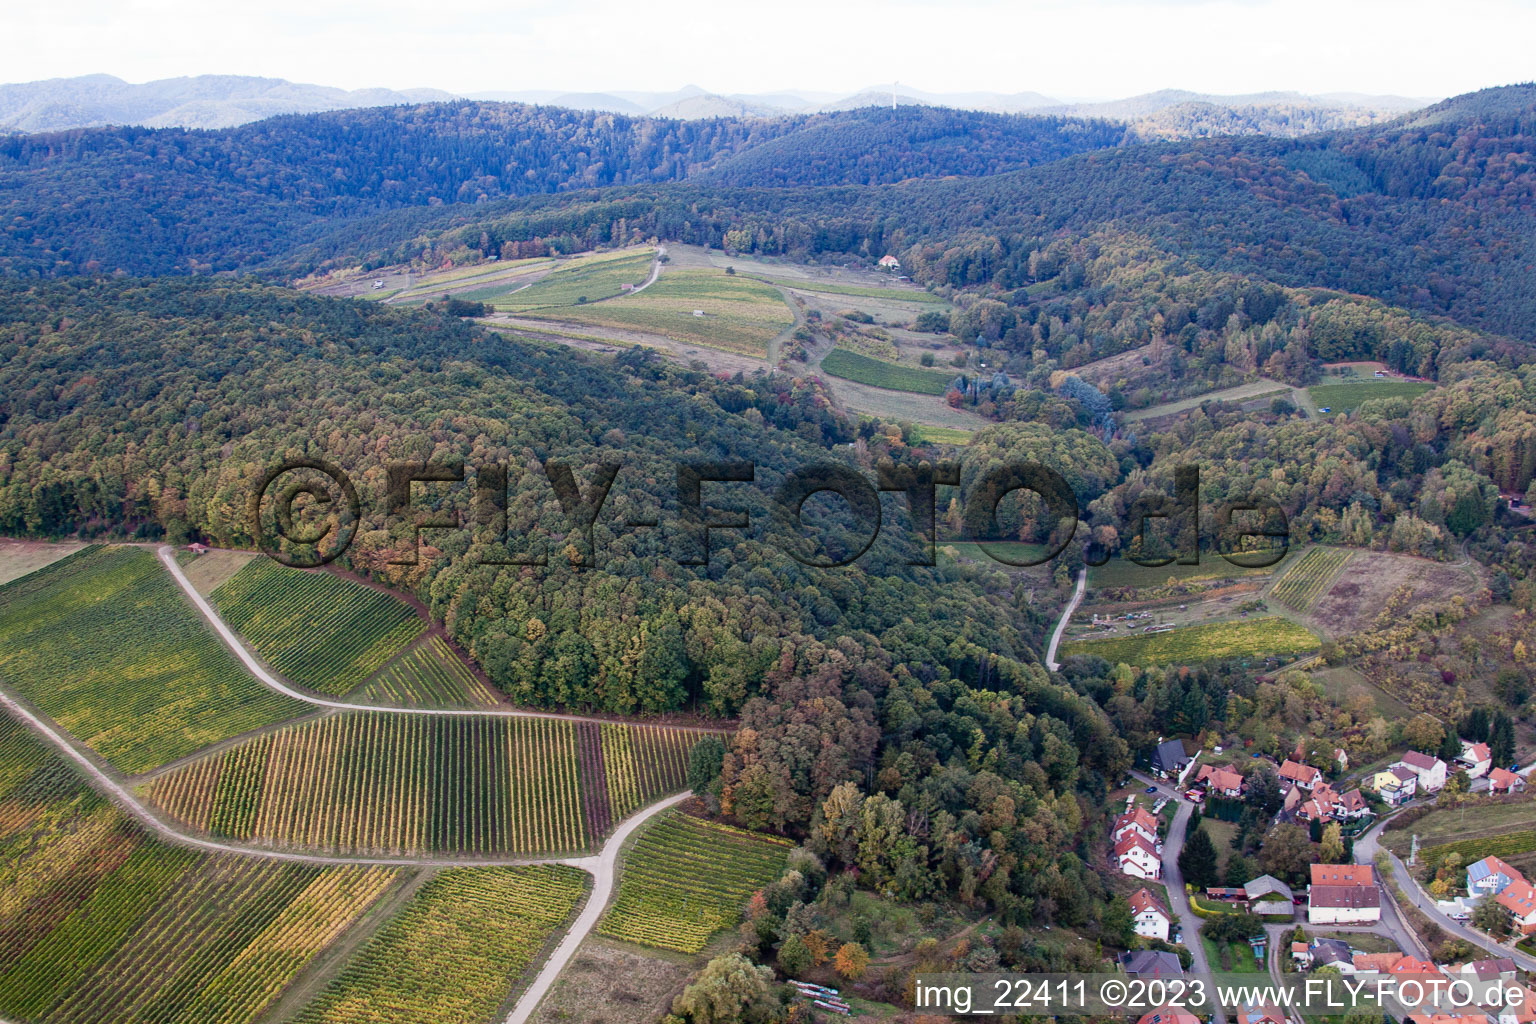 District Pleisweiler in Pleisweiler-Oberhofen in the state Rhineland-Palatinate, Germany from above